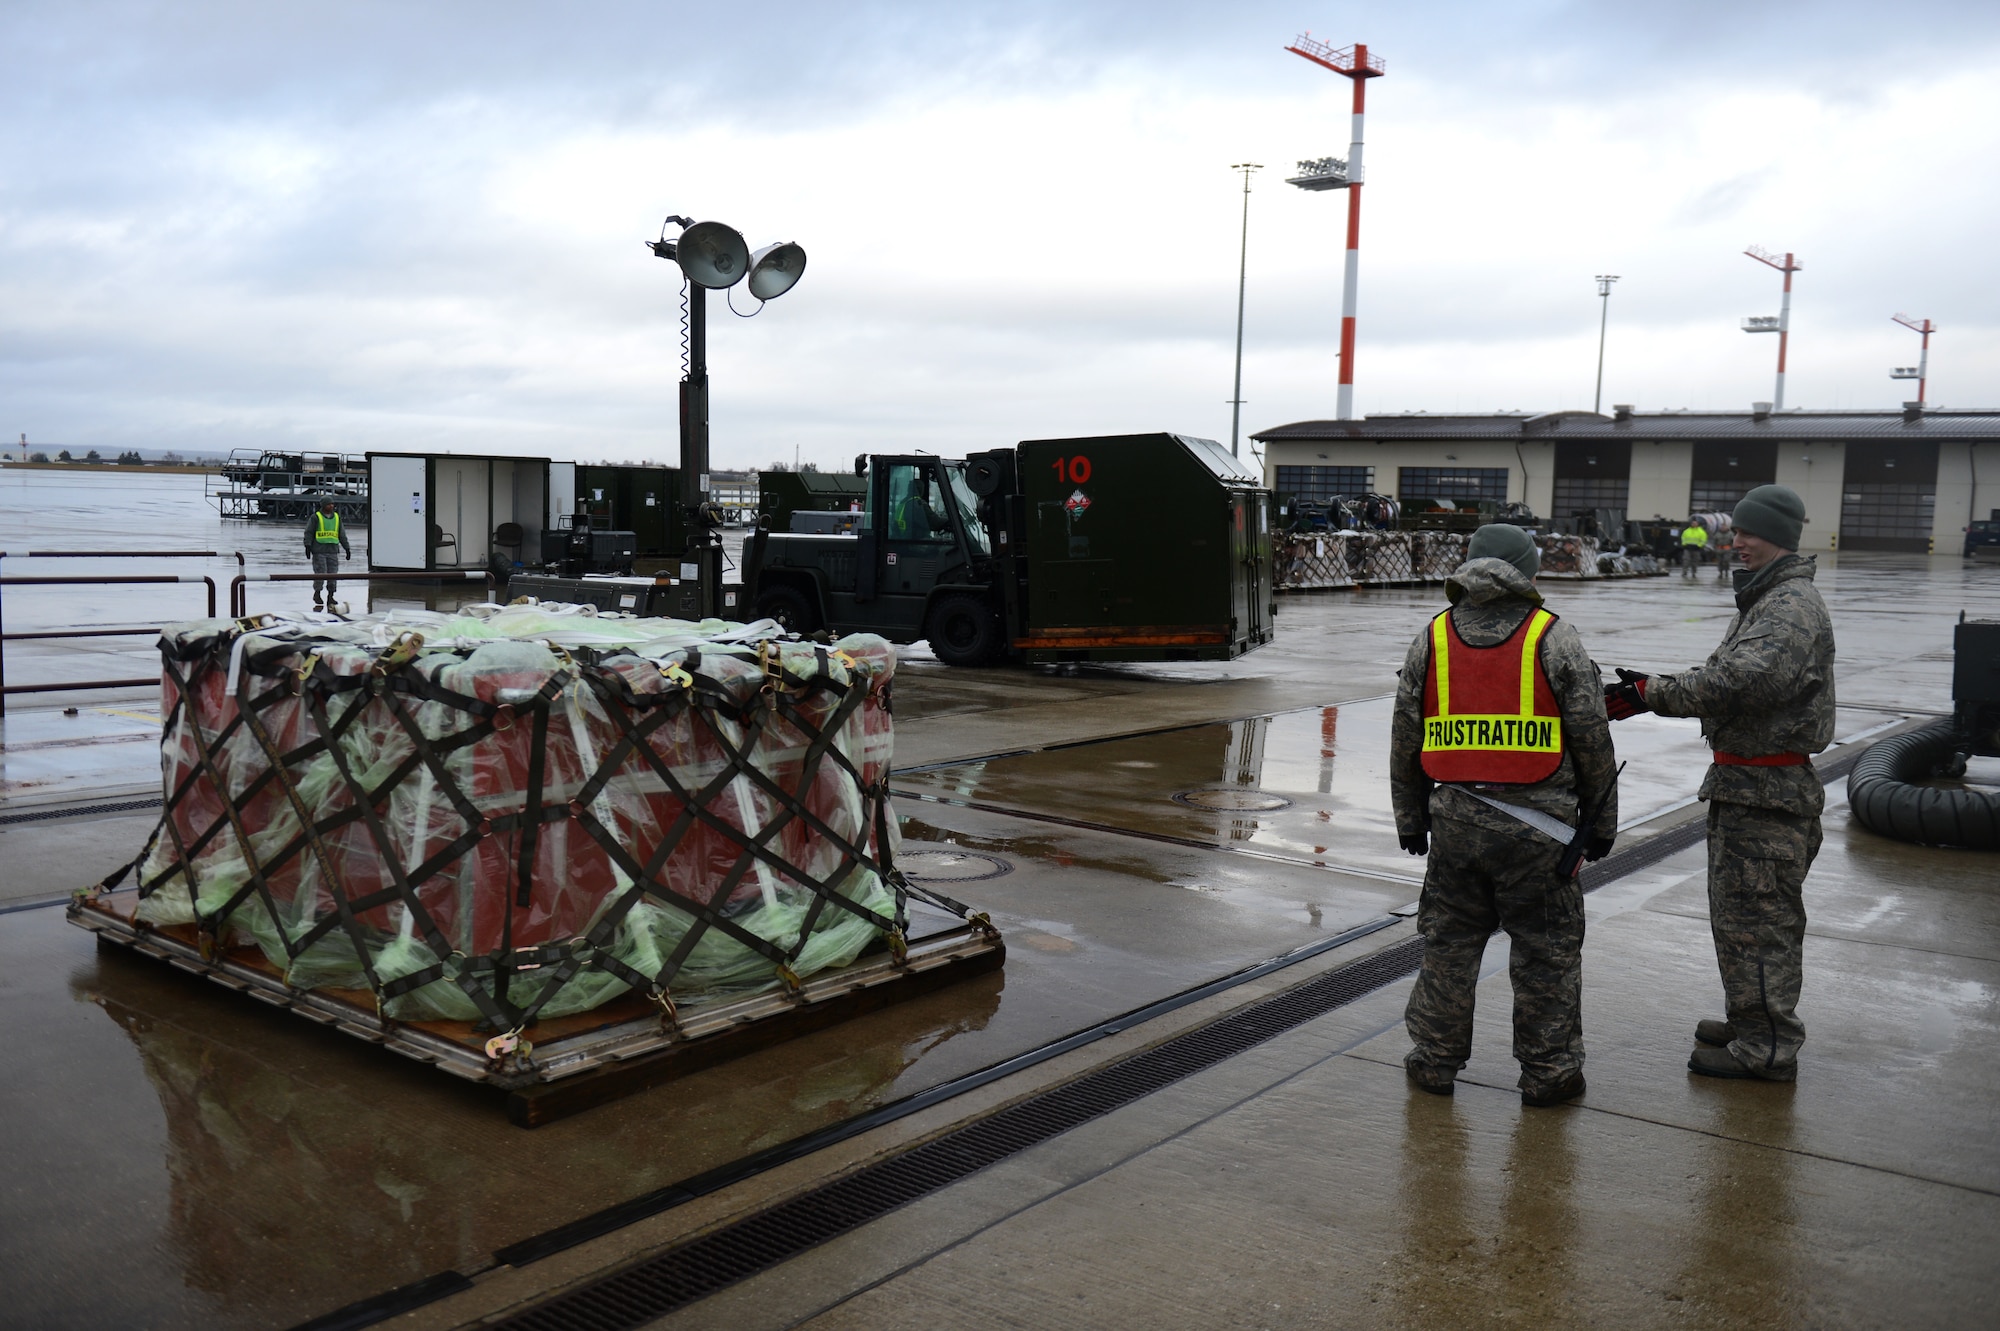 SPANGDAHLEM AIR BASE, Germany – U.S. Air Force Senior Airman Jonathan Loew, 52nd Logistics Readiness Squadron fuels hydrant from Palmer, Alaska, left, and Senior Airman Coleman Haynes, 480th Aircraft Maintenance Squadron hazardous equipment specialist from Nevis, Minn., discuss the placement of cargo on the flightline Dec. 27, 2012. Cargo containers are organized in the order they will be packed on the plane to expedite the process. The cargo will accompany the 480th Fighter Squadron to Nellis Air Force Base for Red Flag, an advanced aerial combat training exercise. (U.S. Air Force photo by Airman 1st Class Gustavo Castillo/Released)